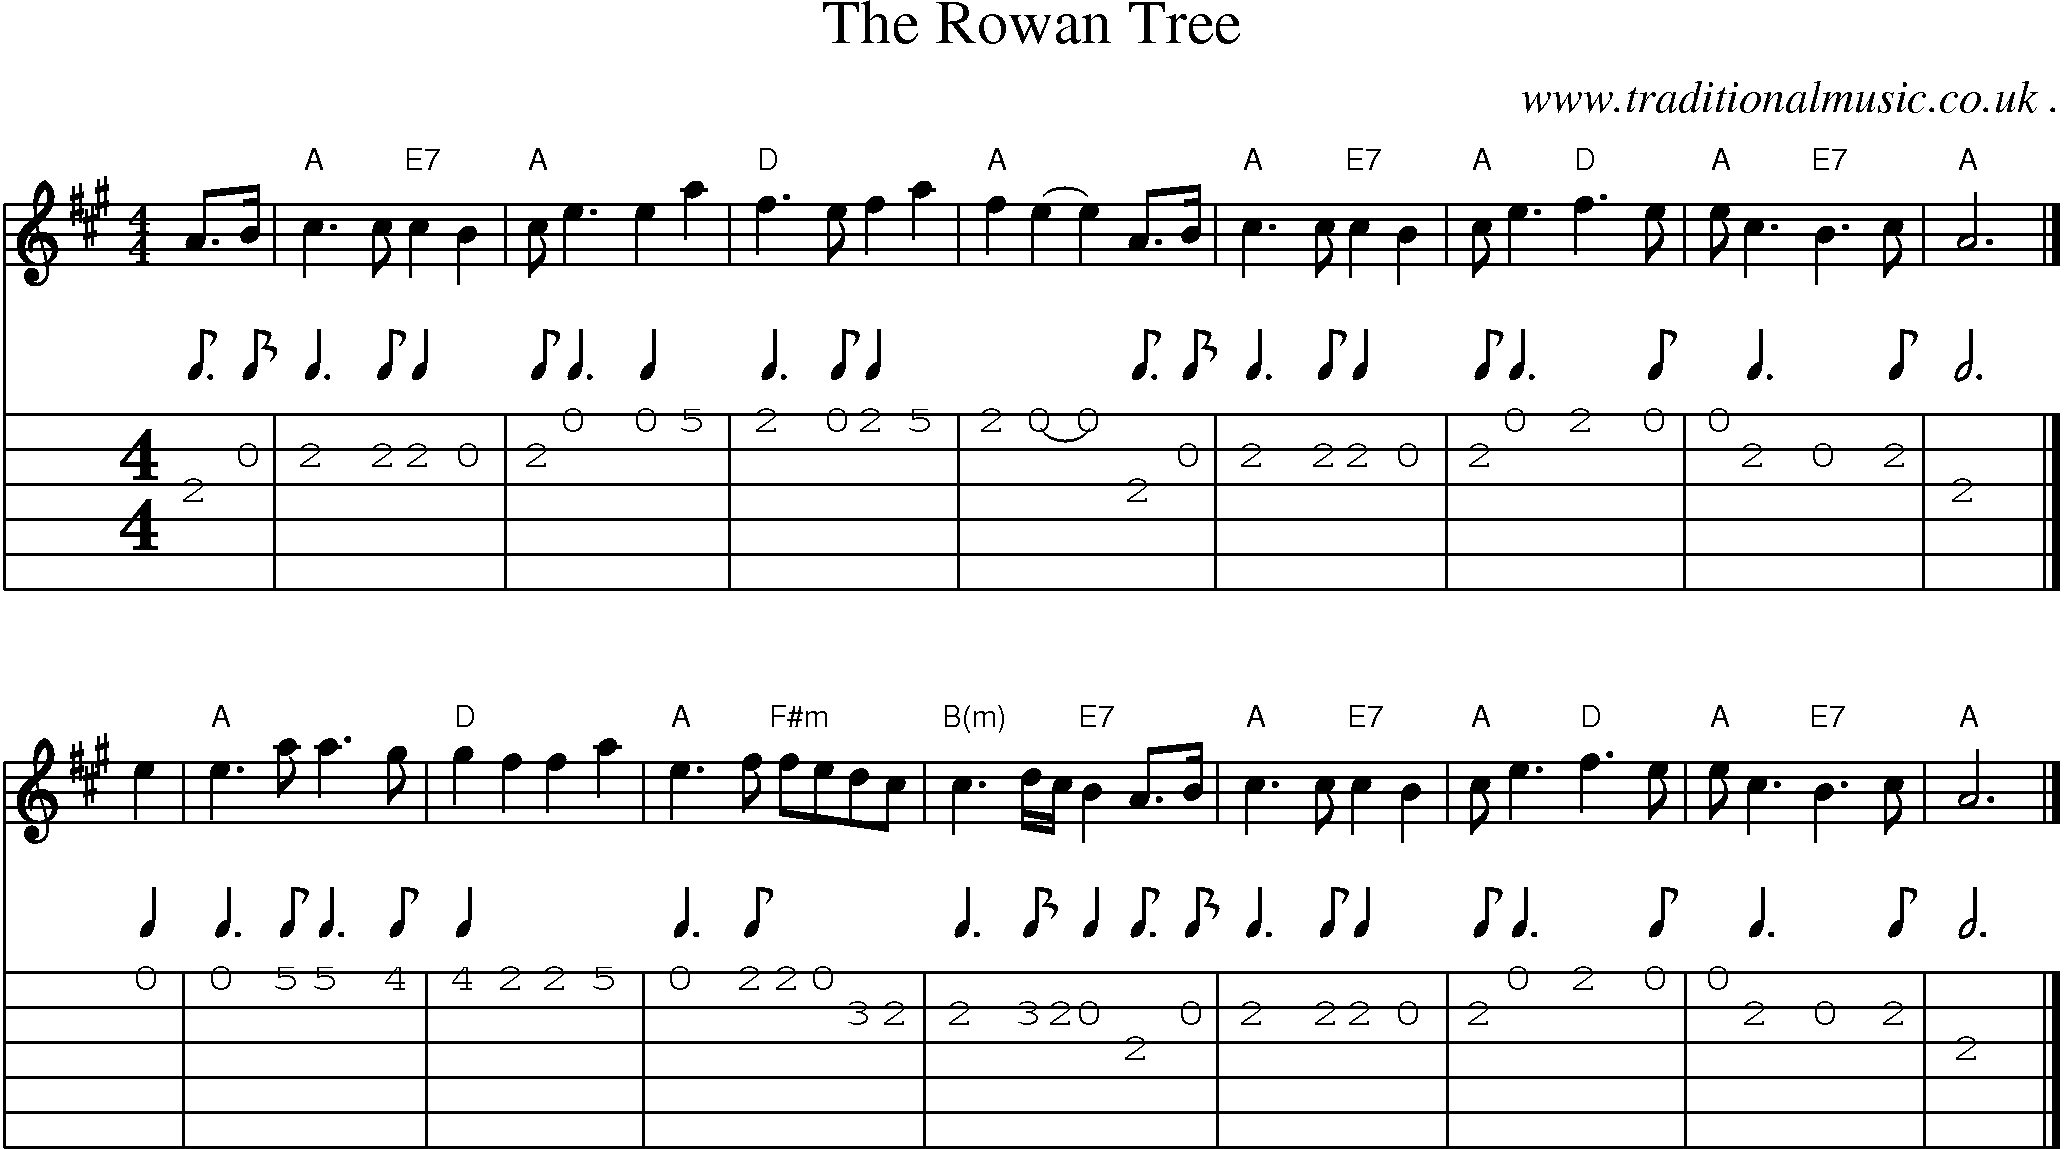 Sheet-music  score, Chords and Guitar Tabs for The Rowan Tree